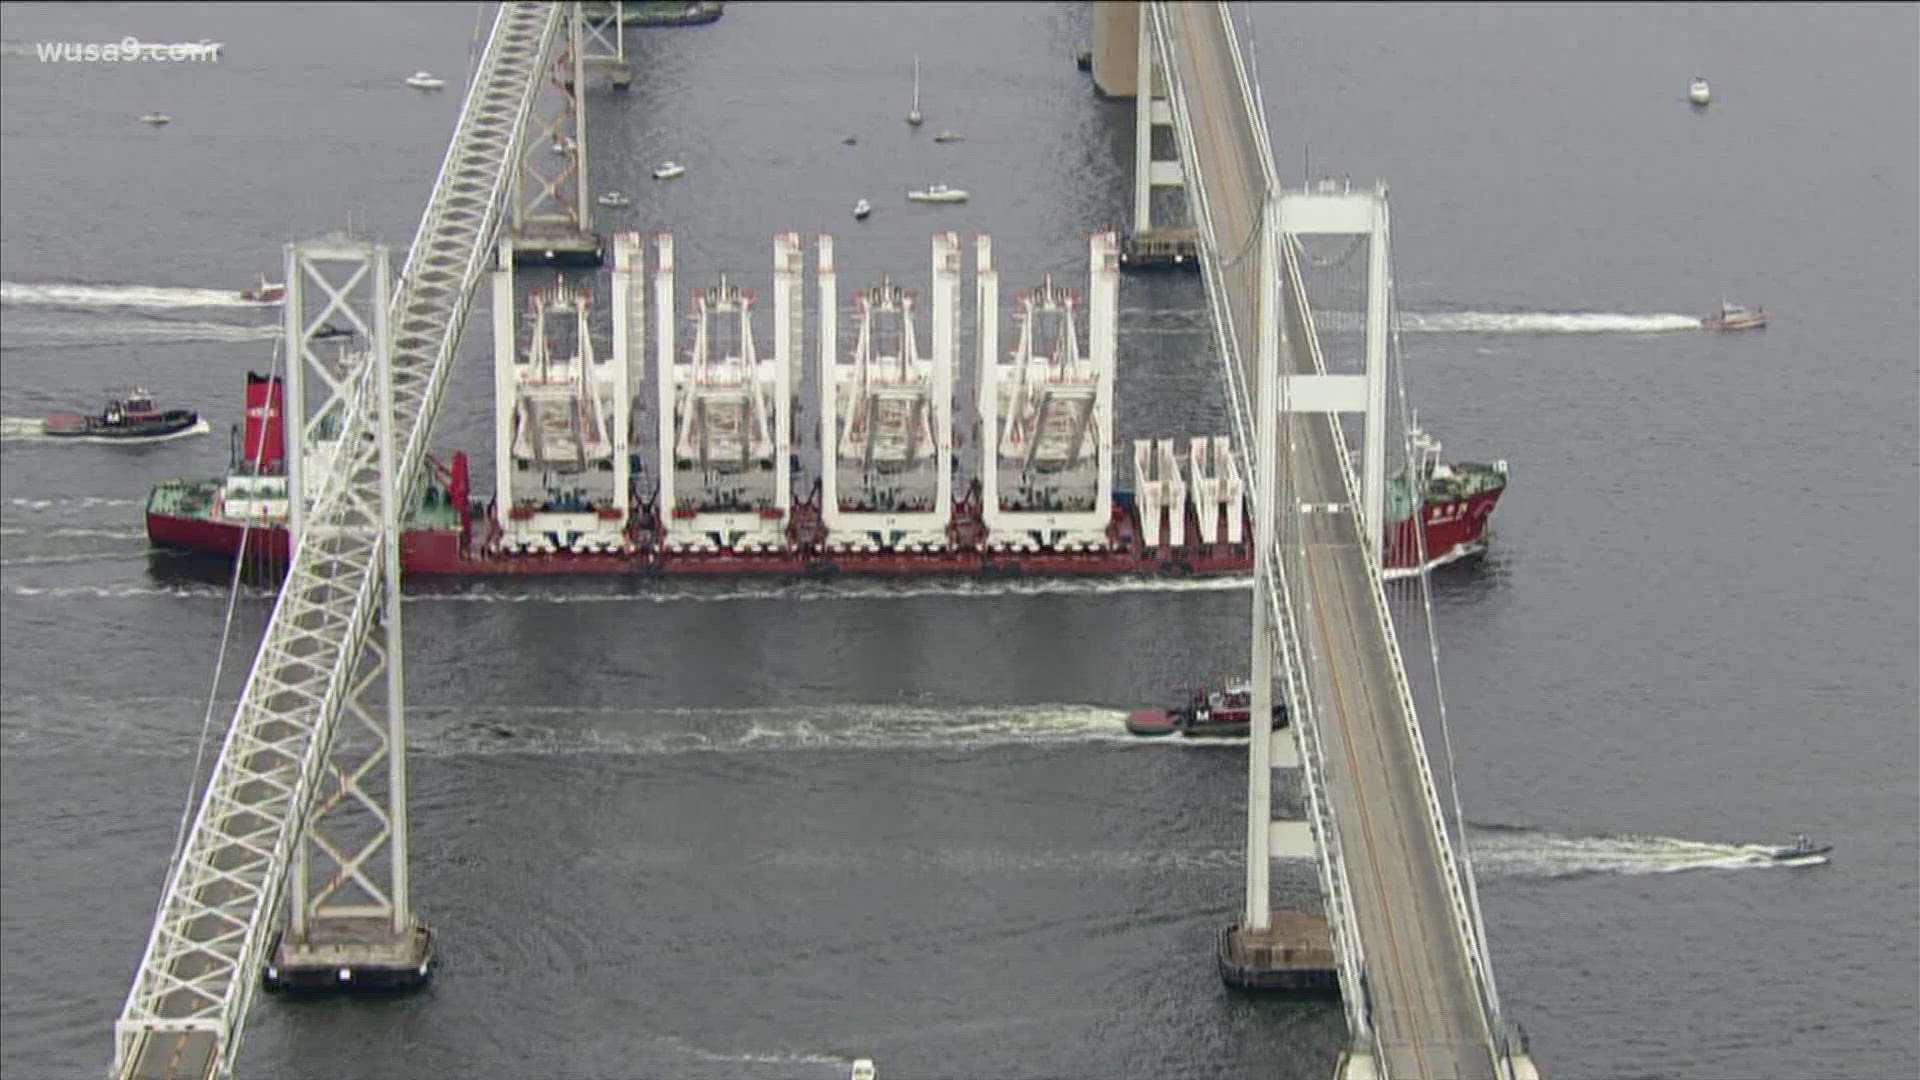 Traffic was briefly stopped on the Bay Bridge to allow for the delivery of large cranes Thursday morning